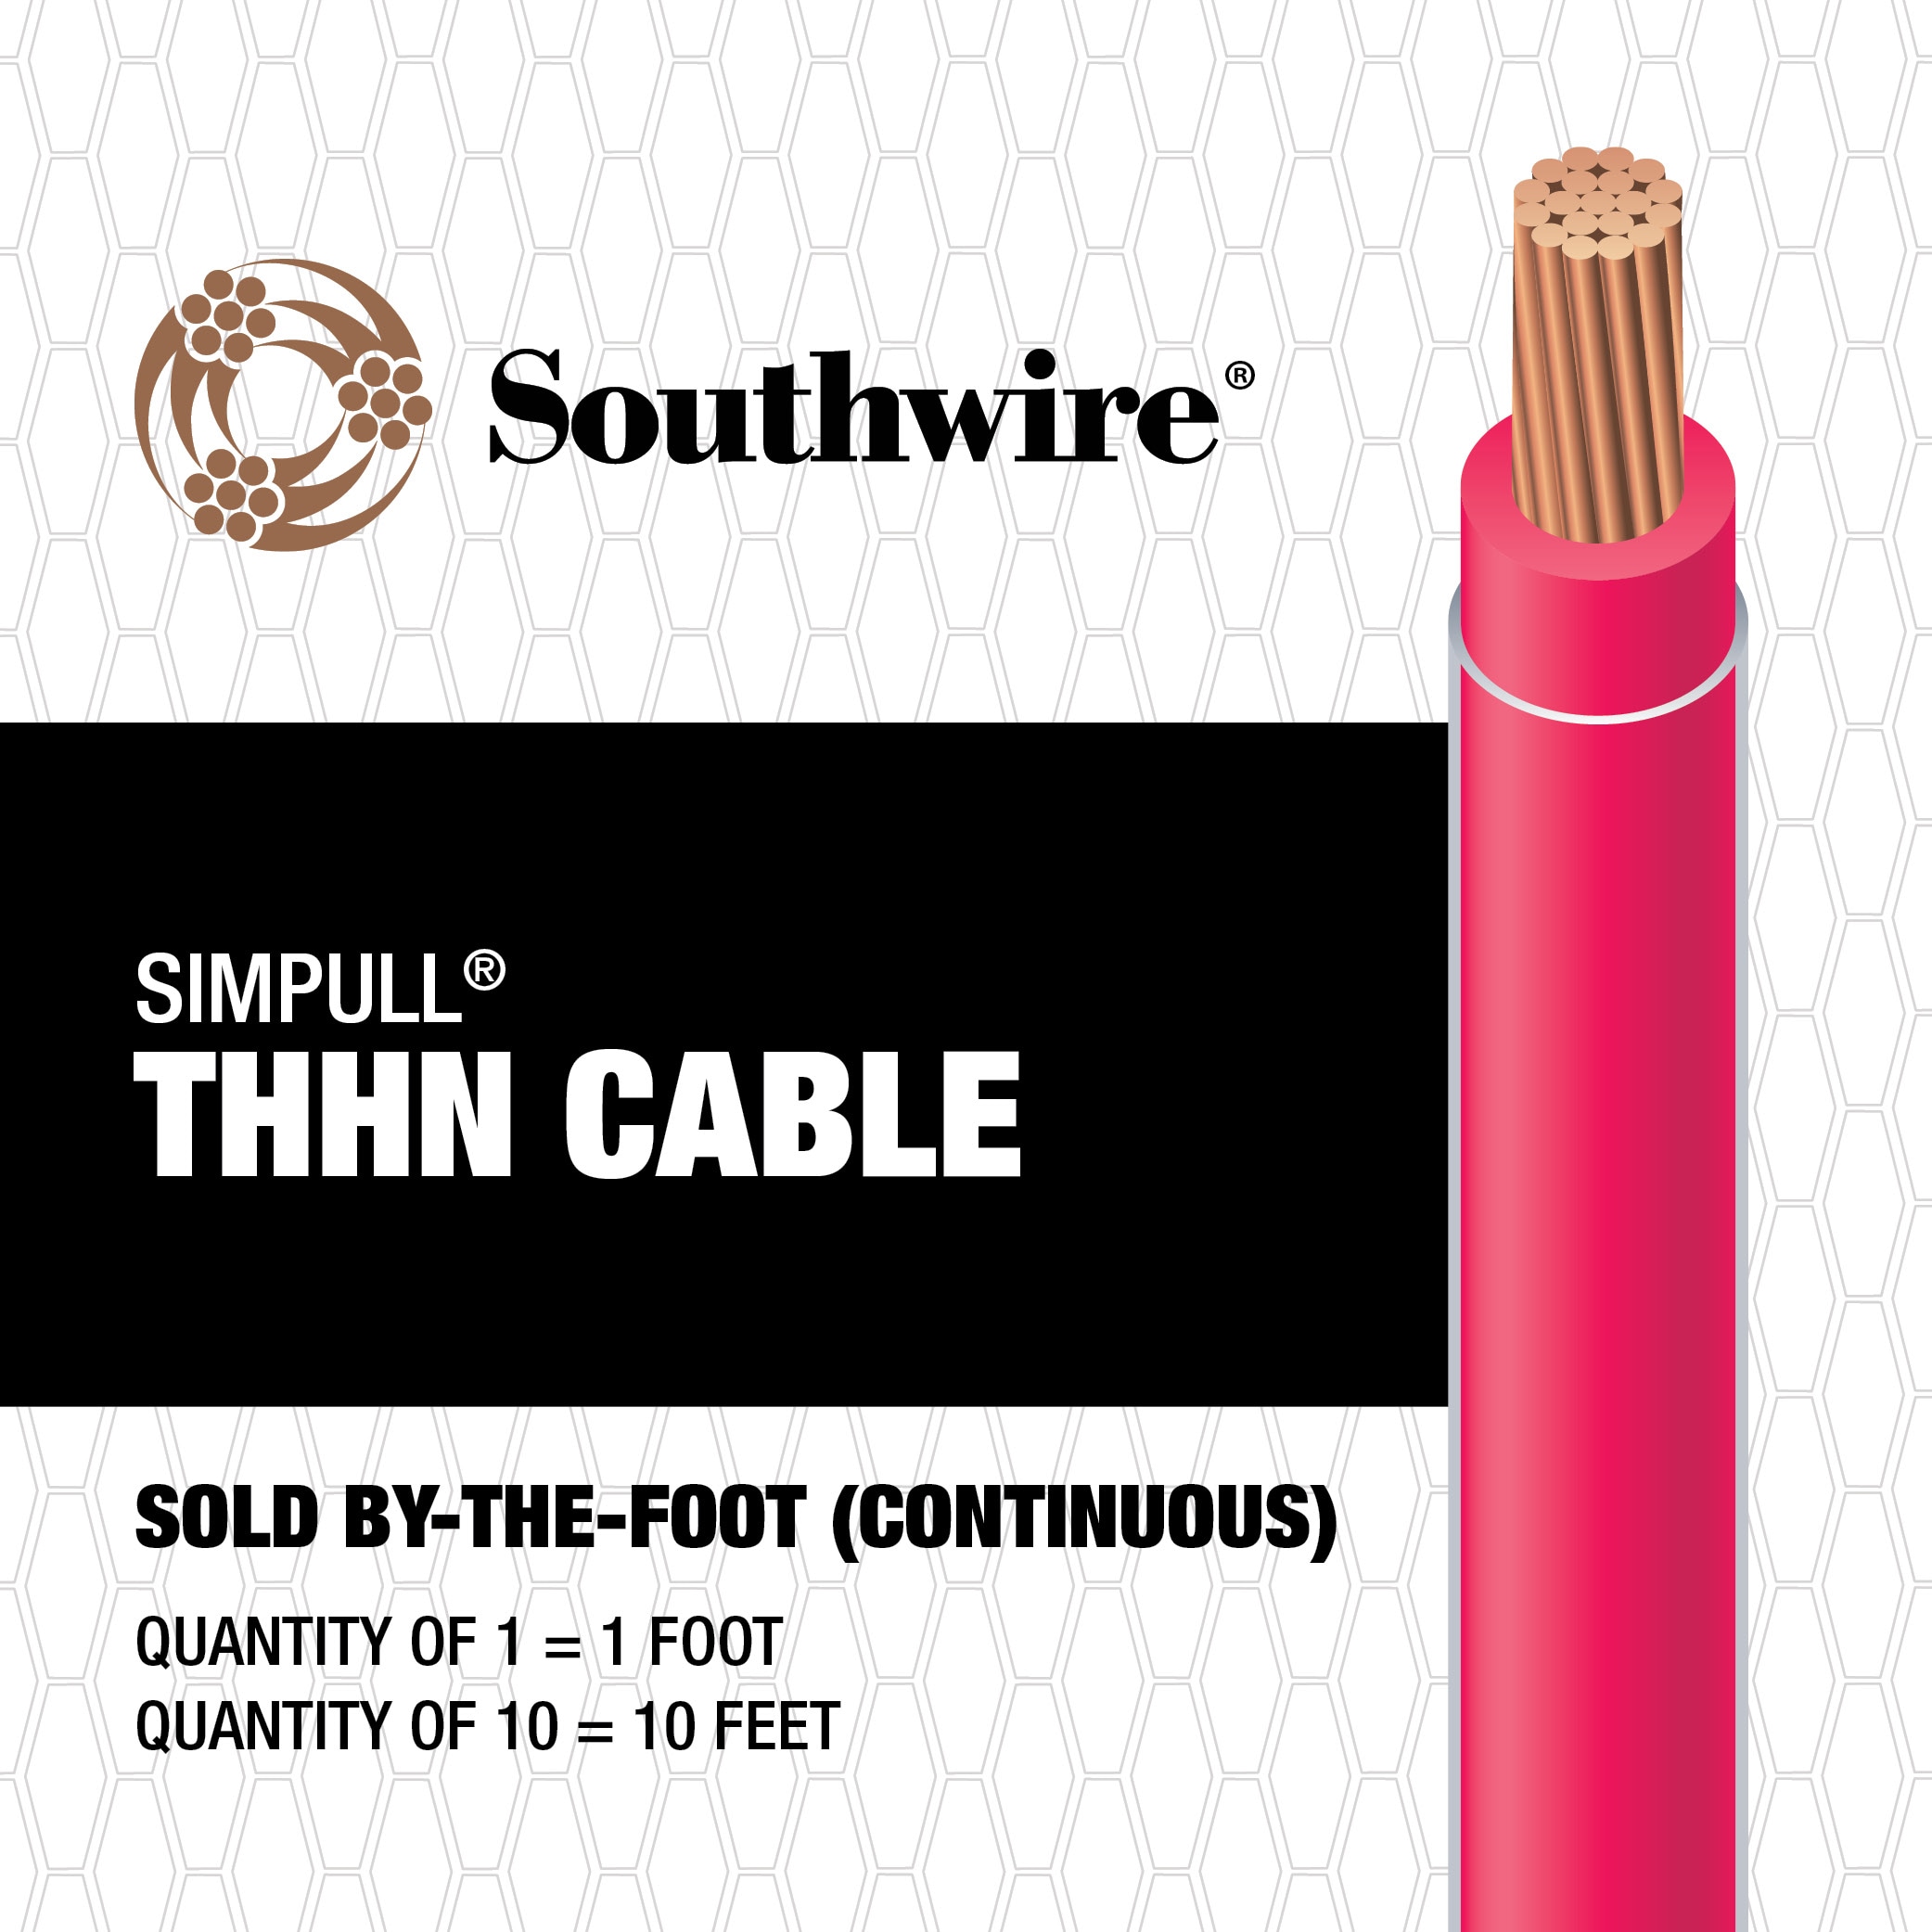 THHN THWN 6 AWG GAUGE 75 BLACK, + 75 RED STRANDED COPPER BUILDING WIRE